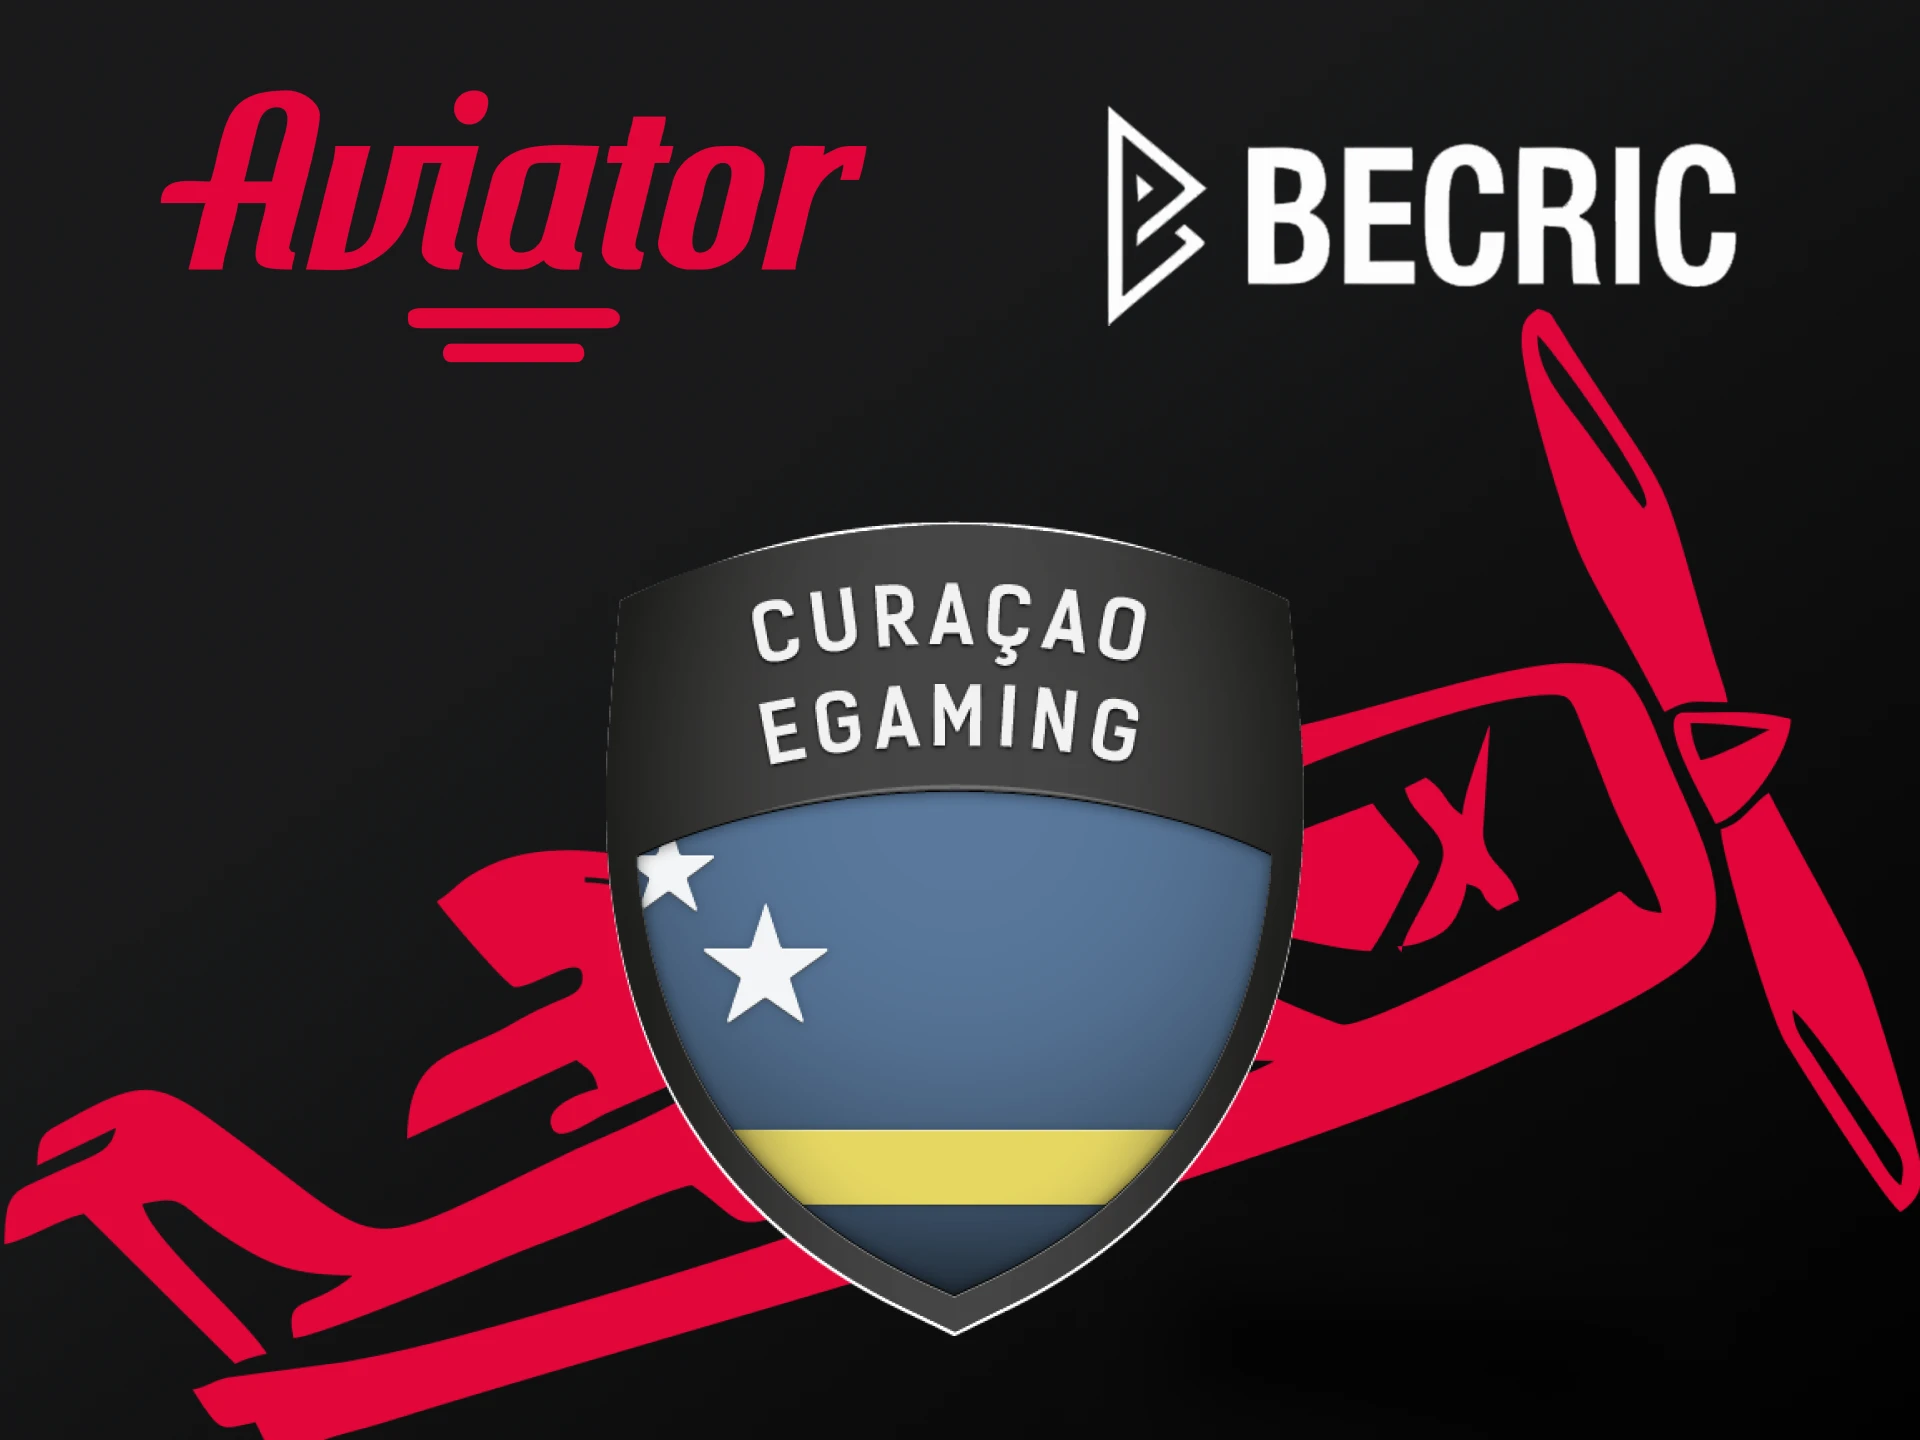 It is legal to play Aviator on the Becric platform.